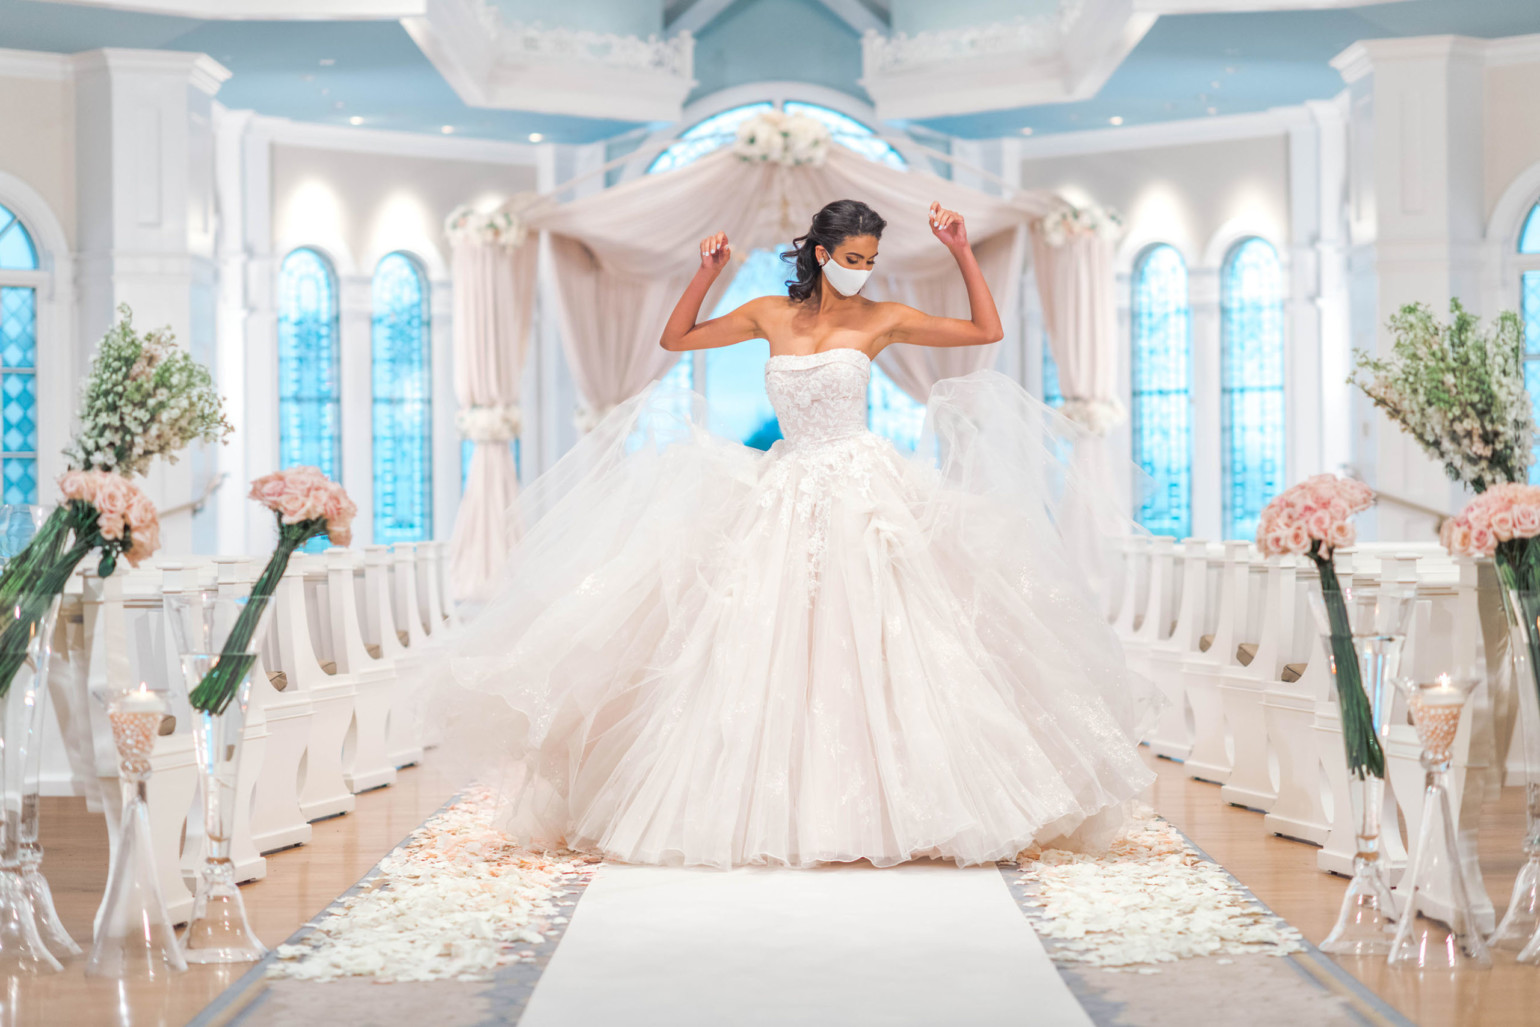 The Disney Fairy Tale Weddings Collection by Disney and Allure Bridals features 21 new wedding dresses, each a nod to one of Disney's most iconic princesses through the years.